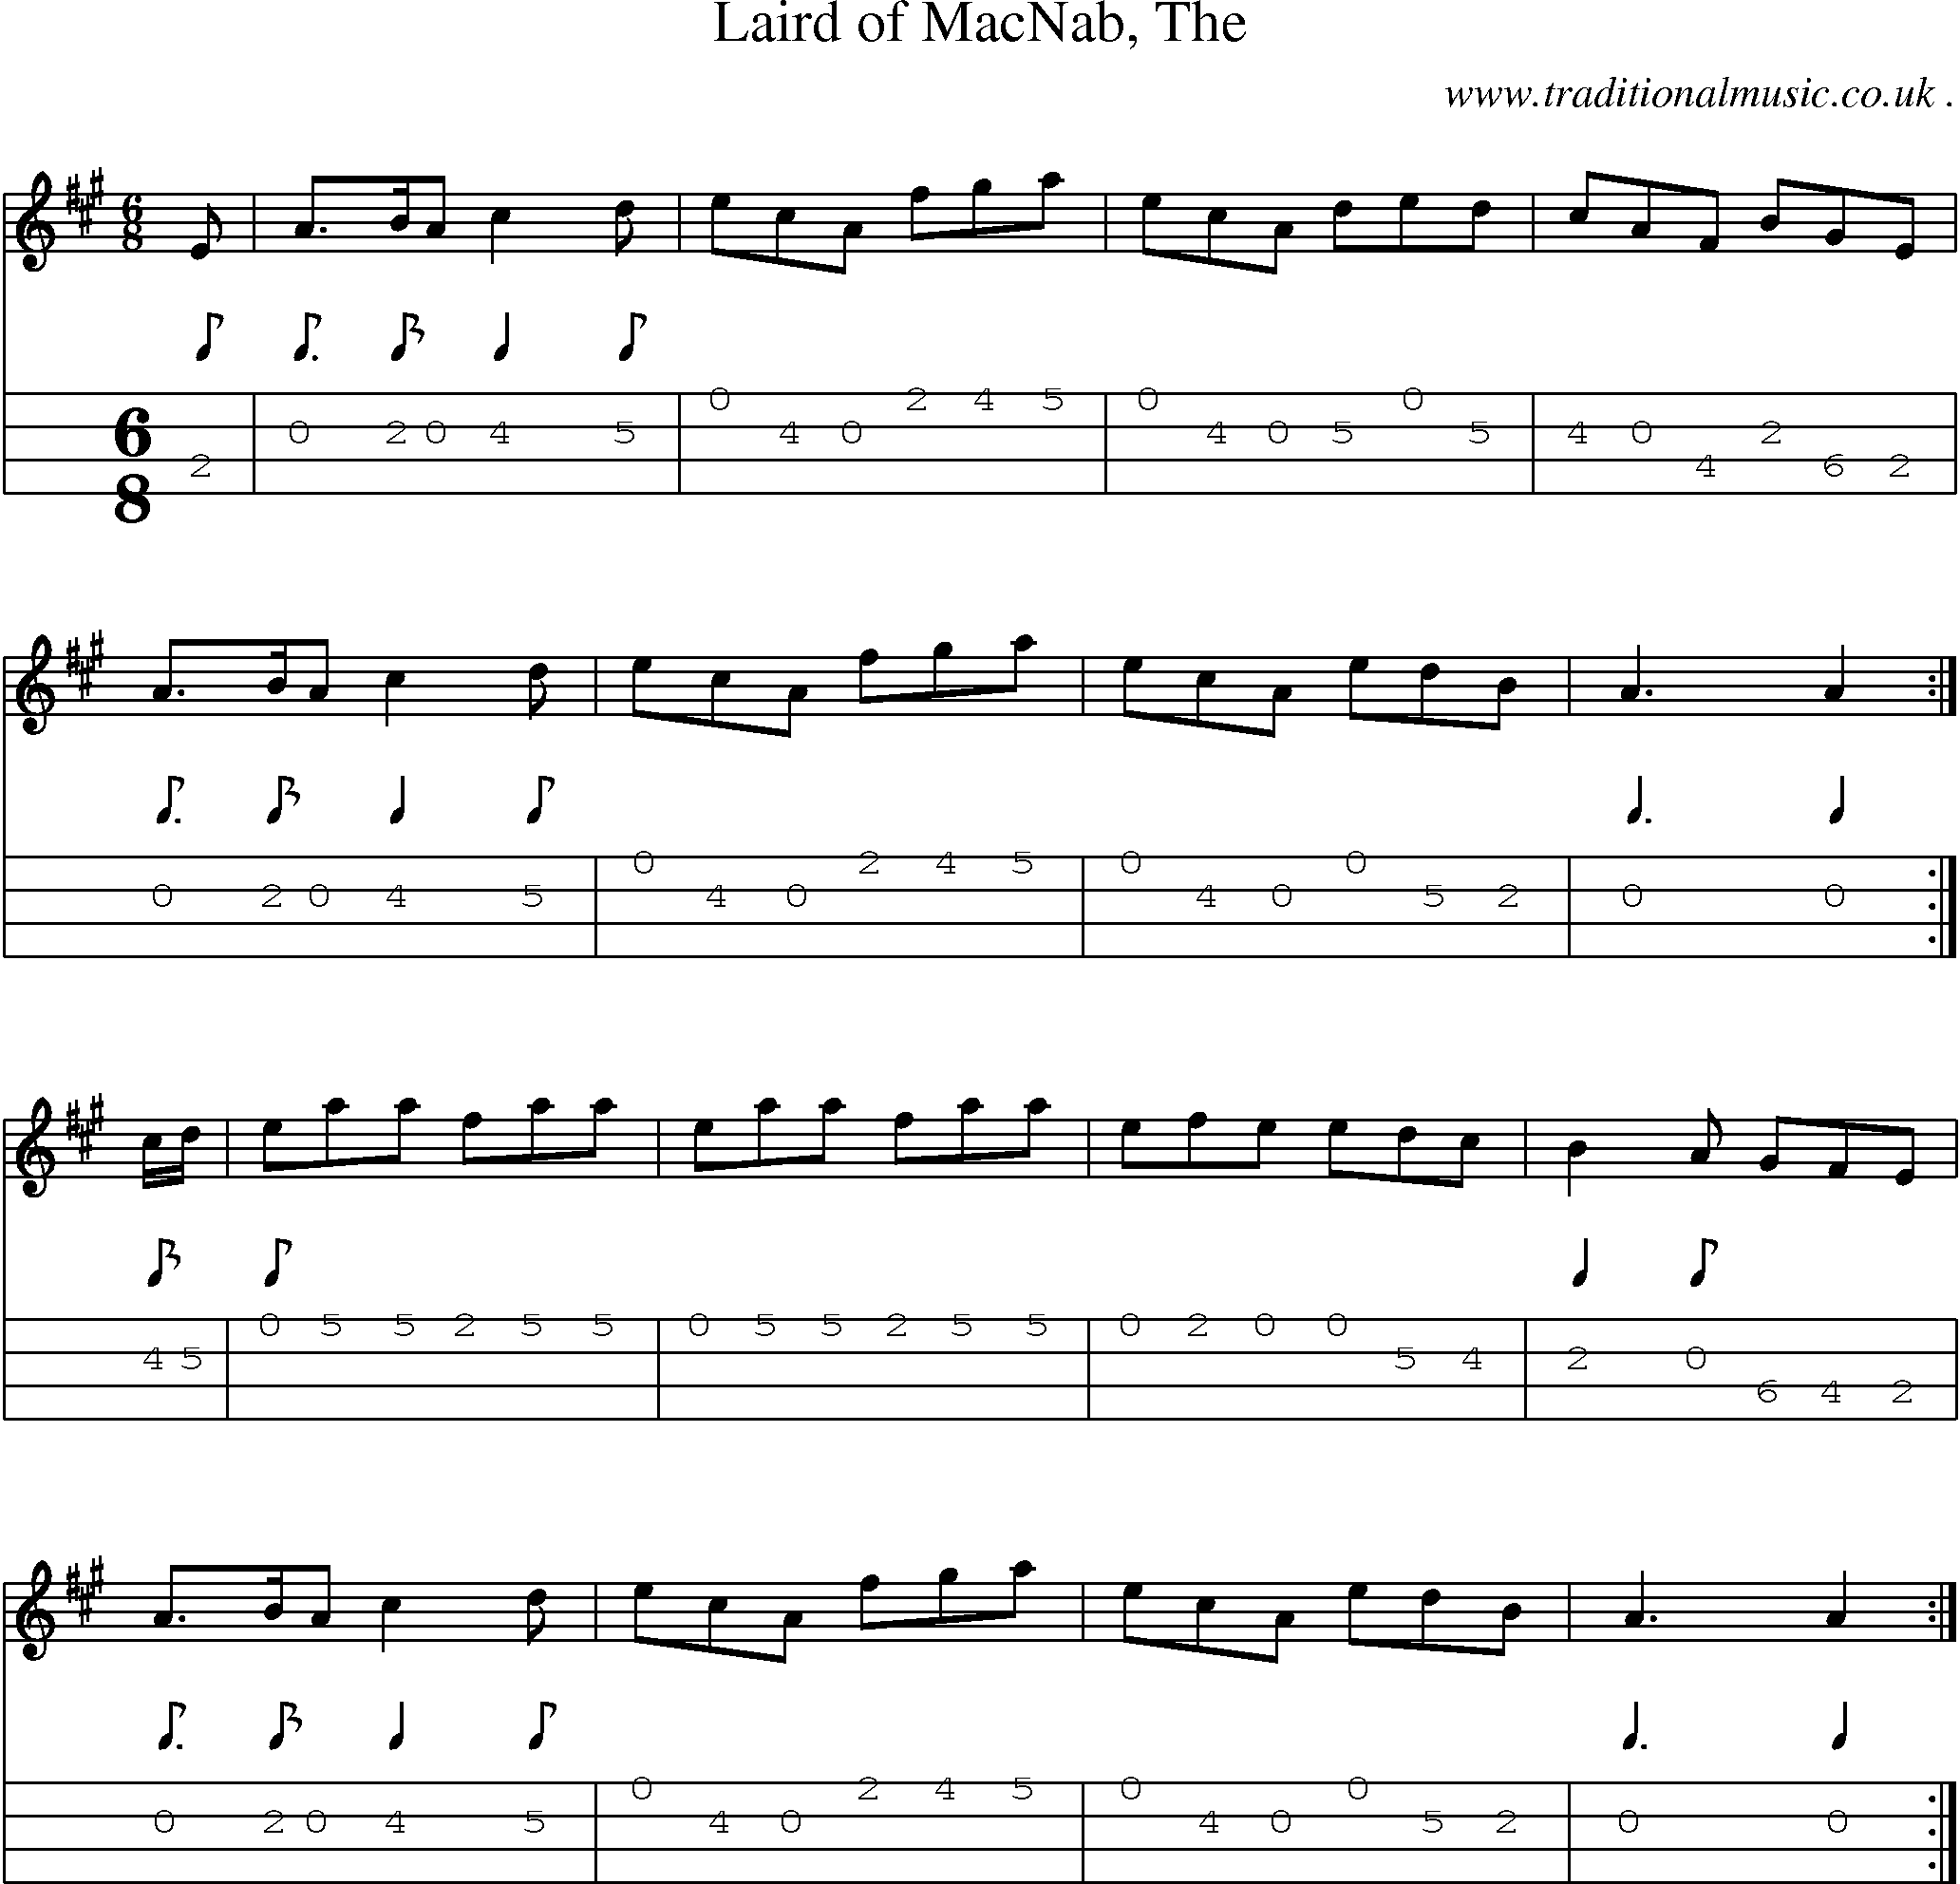 Sheet-music  score, Chords and Mandolin Tabs for Laird Of Macnab The